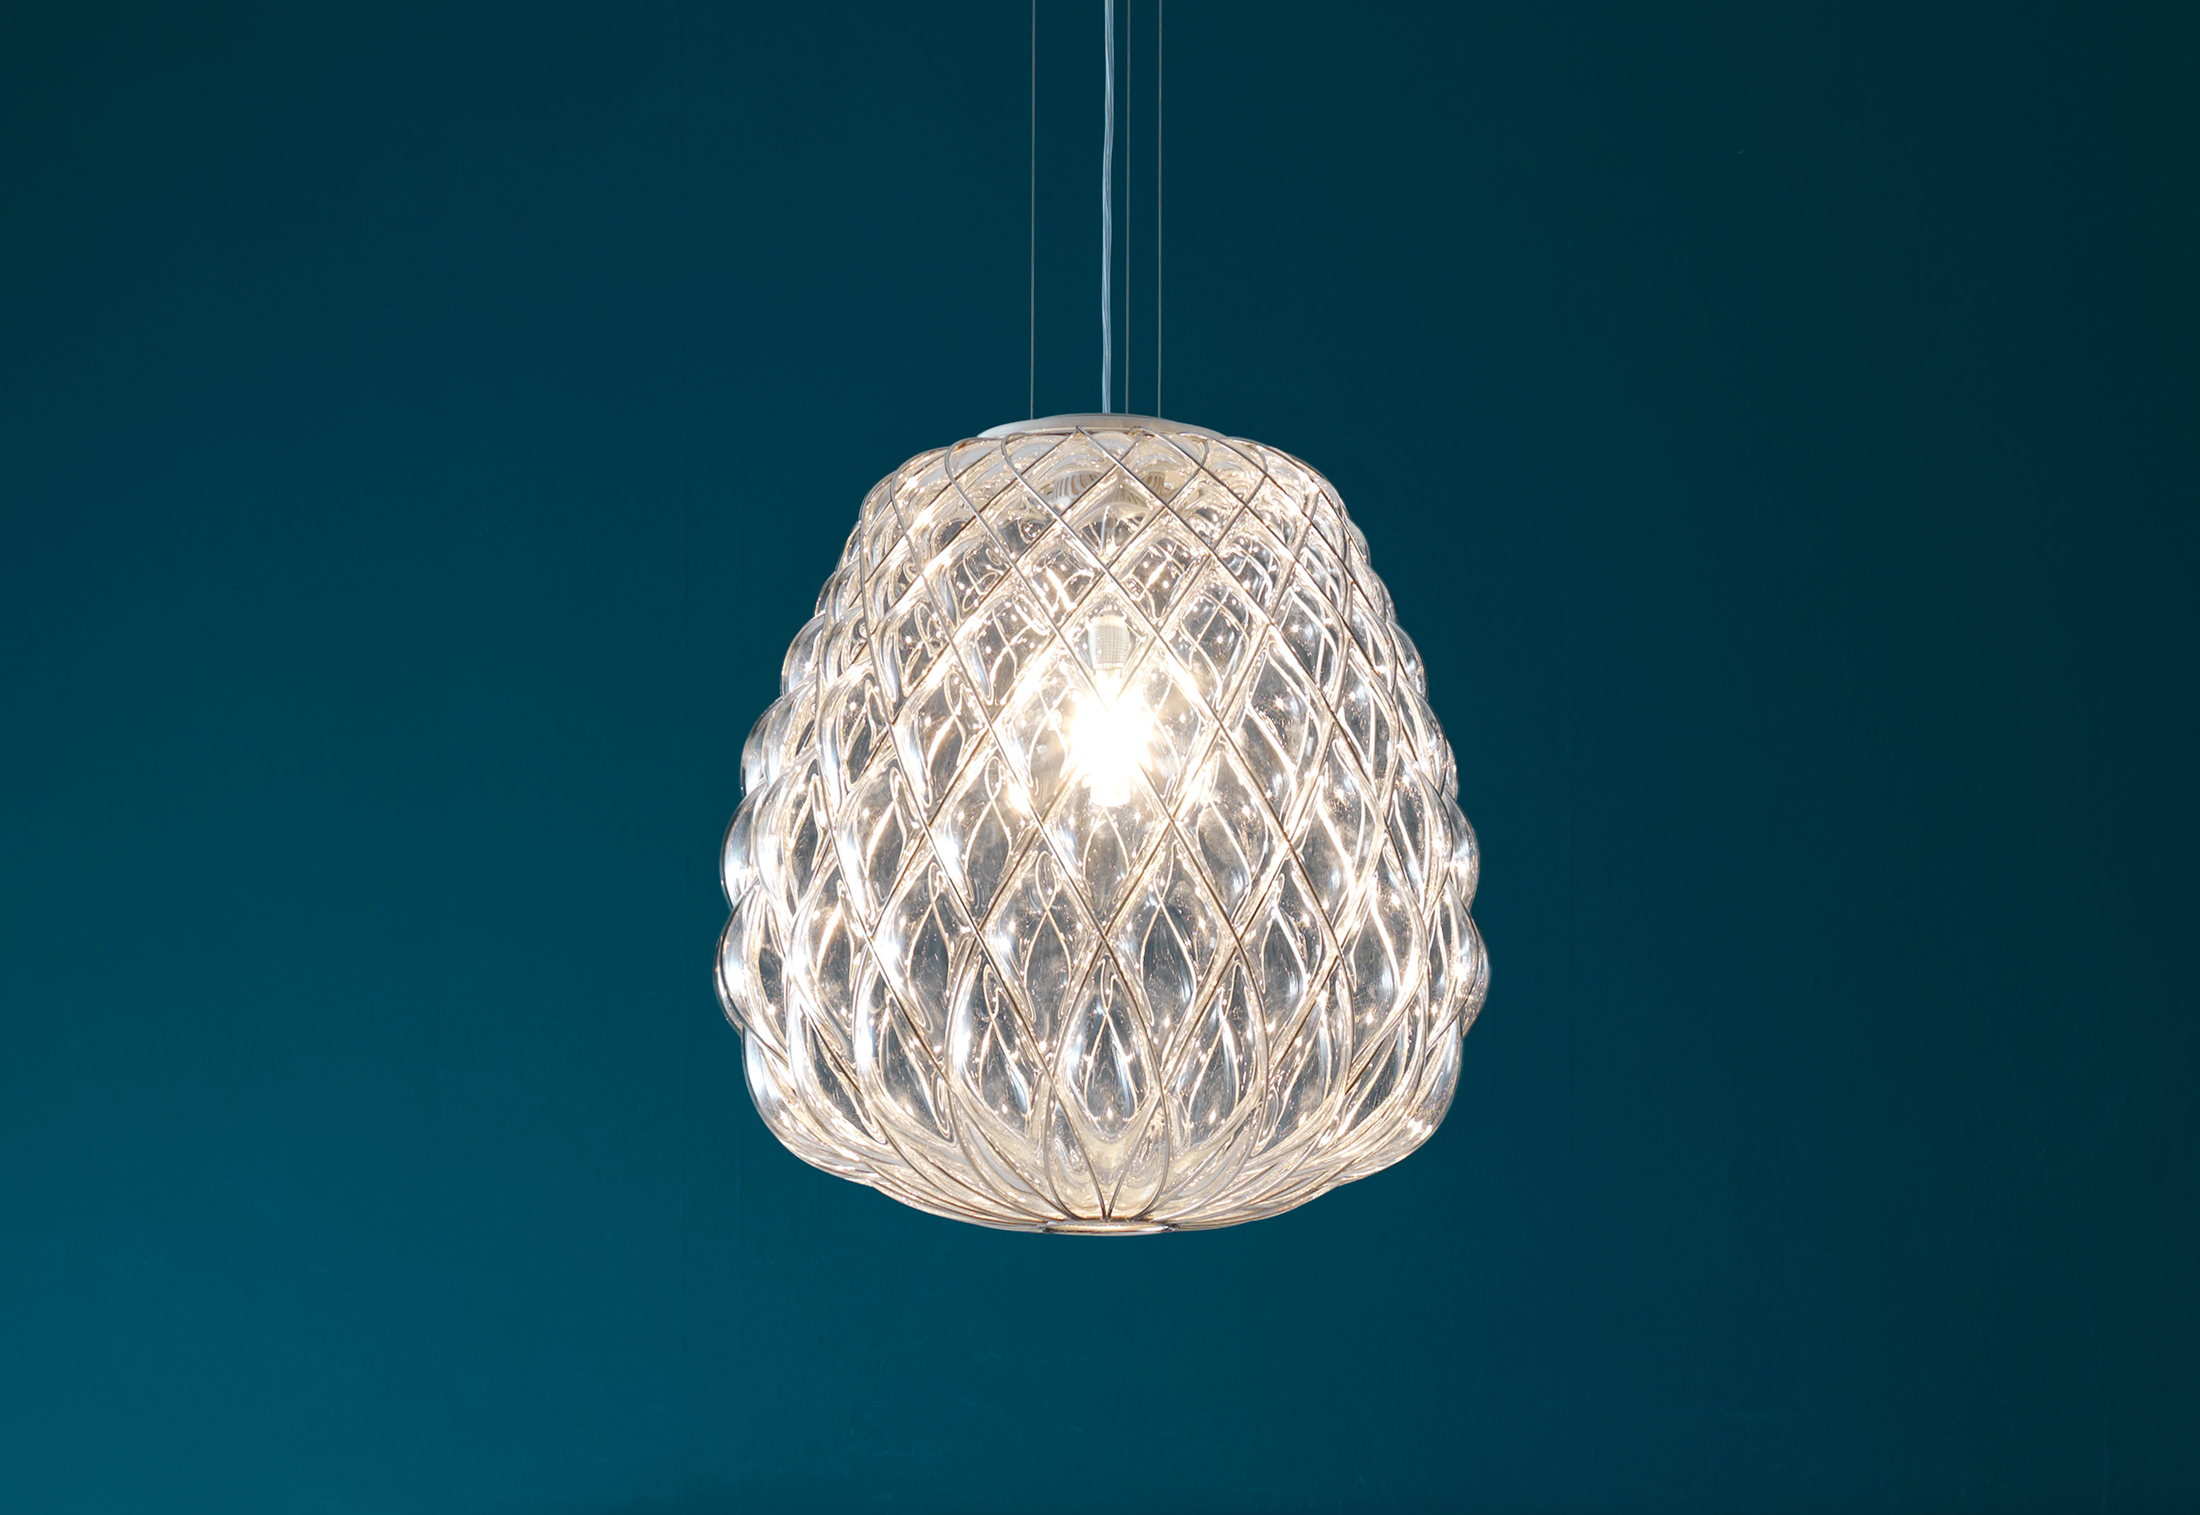 Pinecone Pendant Lamp by Paola Navone for FontanaArte